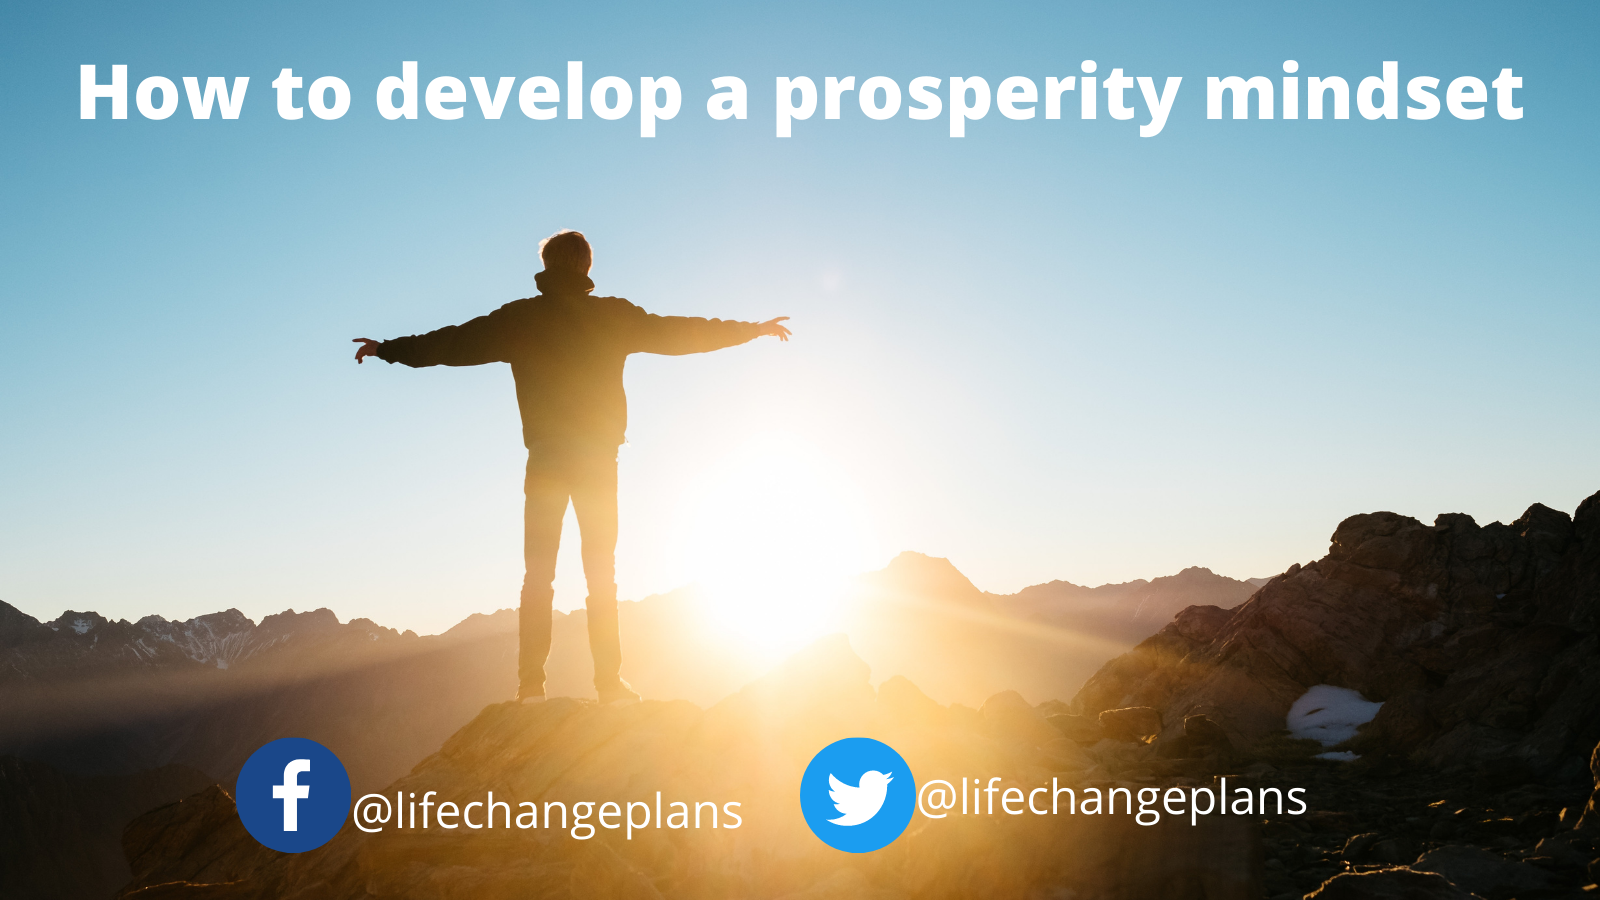 How to develop a prosperity mindset